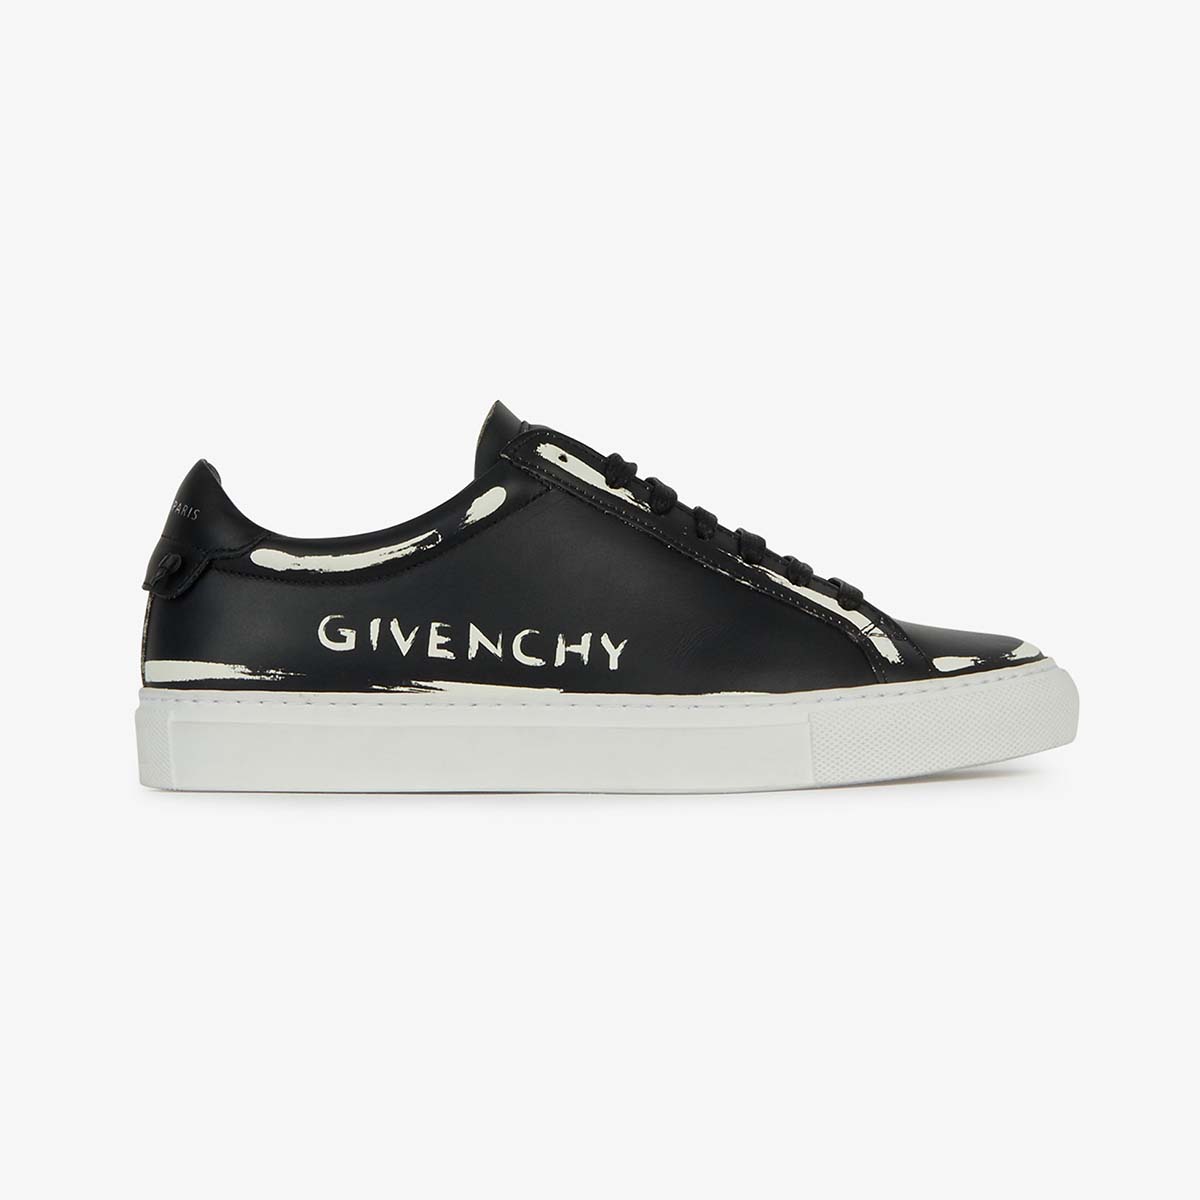 Givenchy Women Givenchy Print Sneakers in Leather Shoes Black